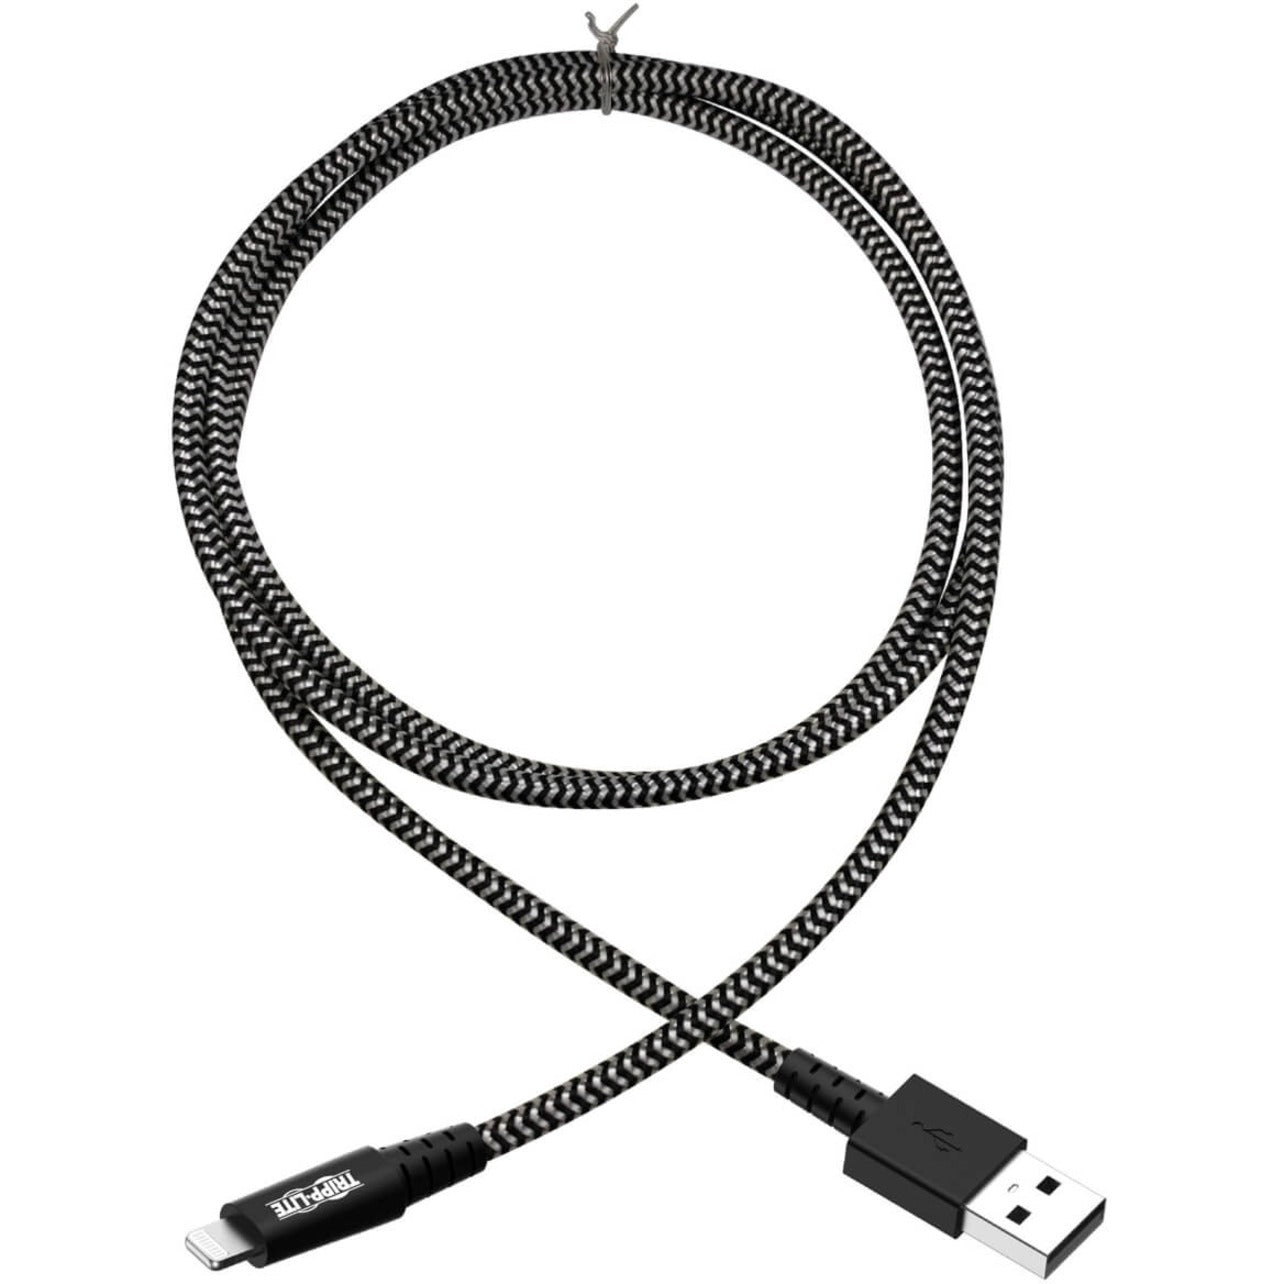 Tripp Lite M100-006-HD Heavy-Duty USB Sync/Charge Cable with Lightning Connector, 6 ft. (1.8 m)